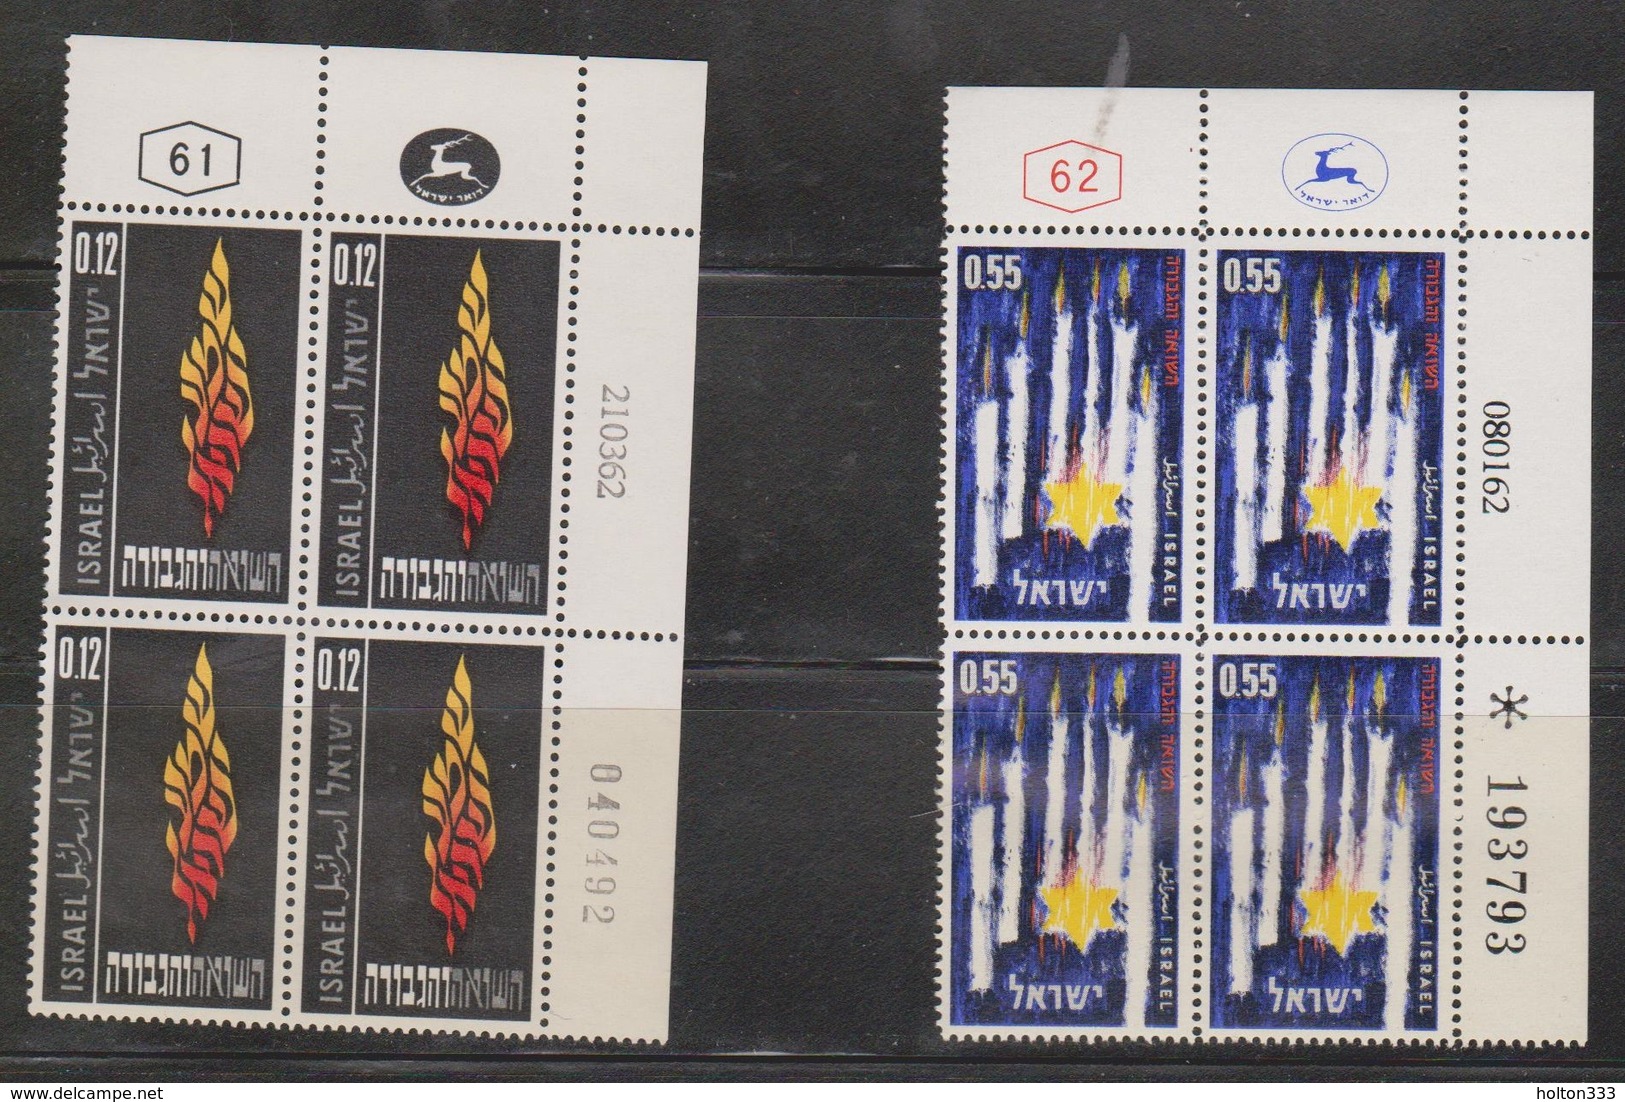 ISRAEL Scott # 220-1 MNH Plate Blocks - Heros & Martyrs Day - Unused Stamps (with Tabs)